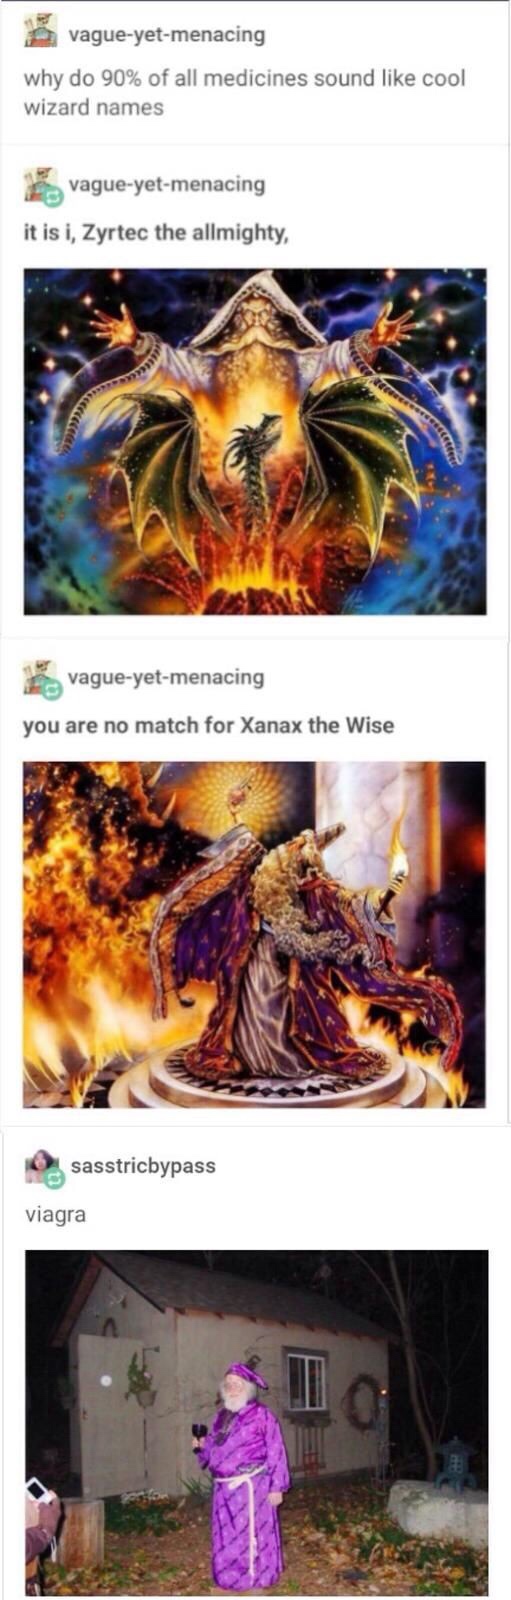 relationship meme of viagra wizard vagueyetmenacing why do 90% of all medicines sound cool wizard names vagueyetmenacing it is i, Zyrtec the allmighty, vagueyetmenacing you are no match for Xanax the Wise sasstricbypass viagra